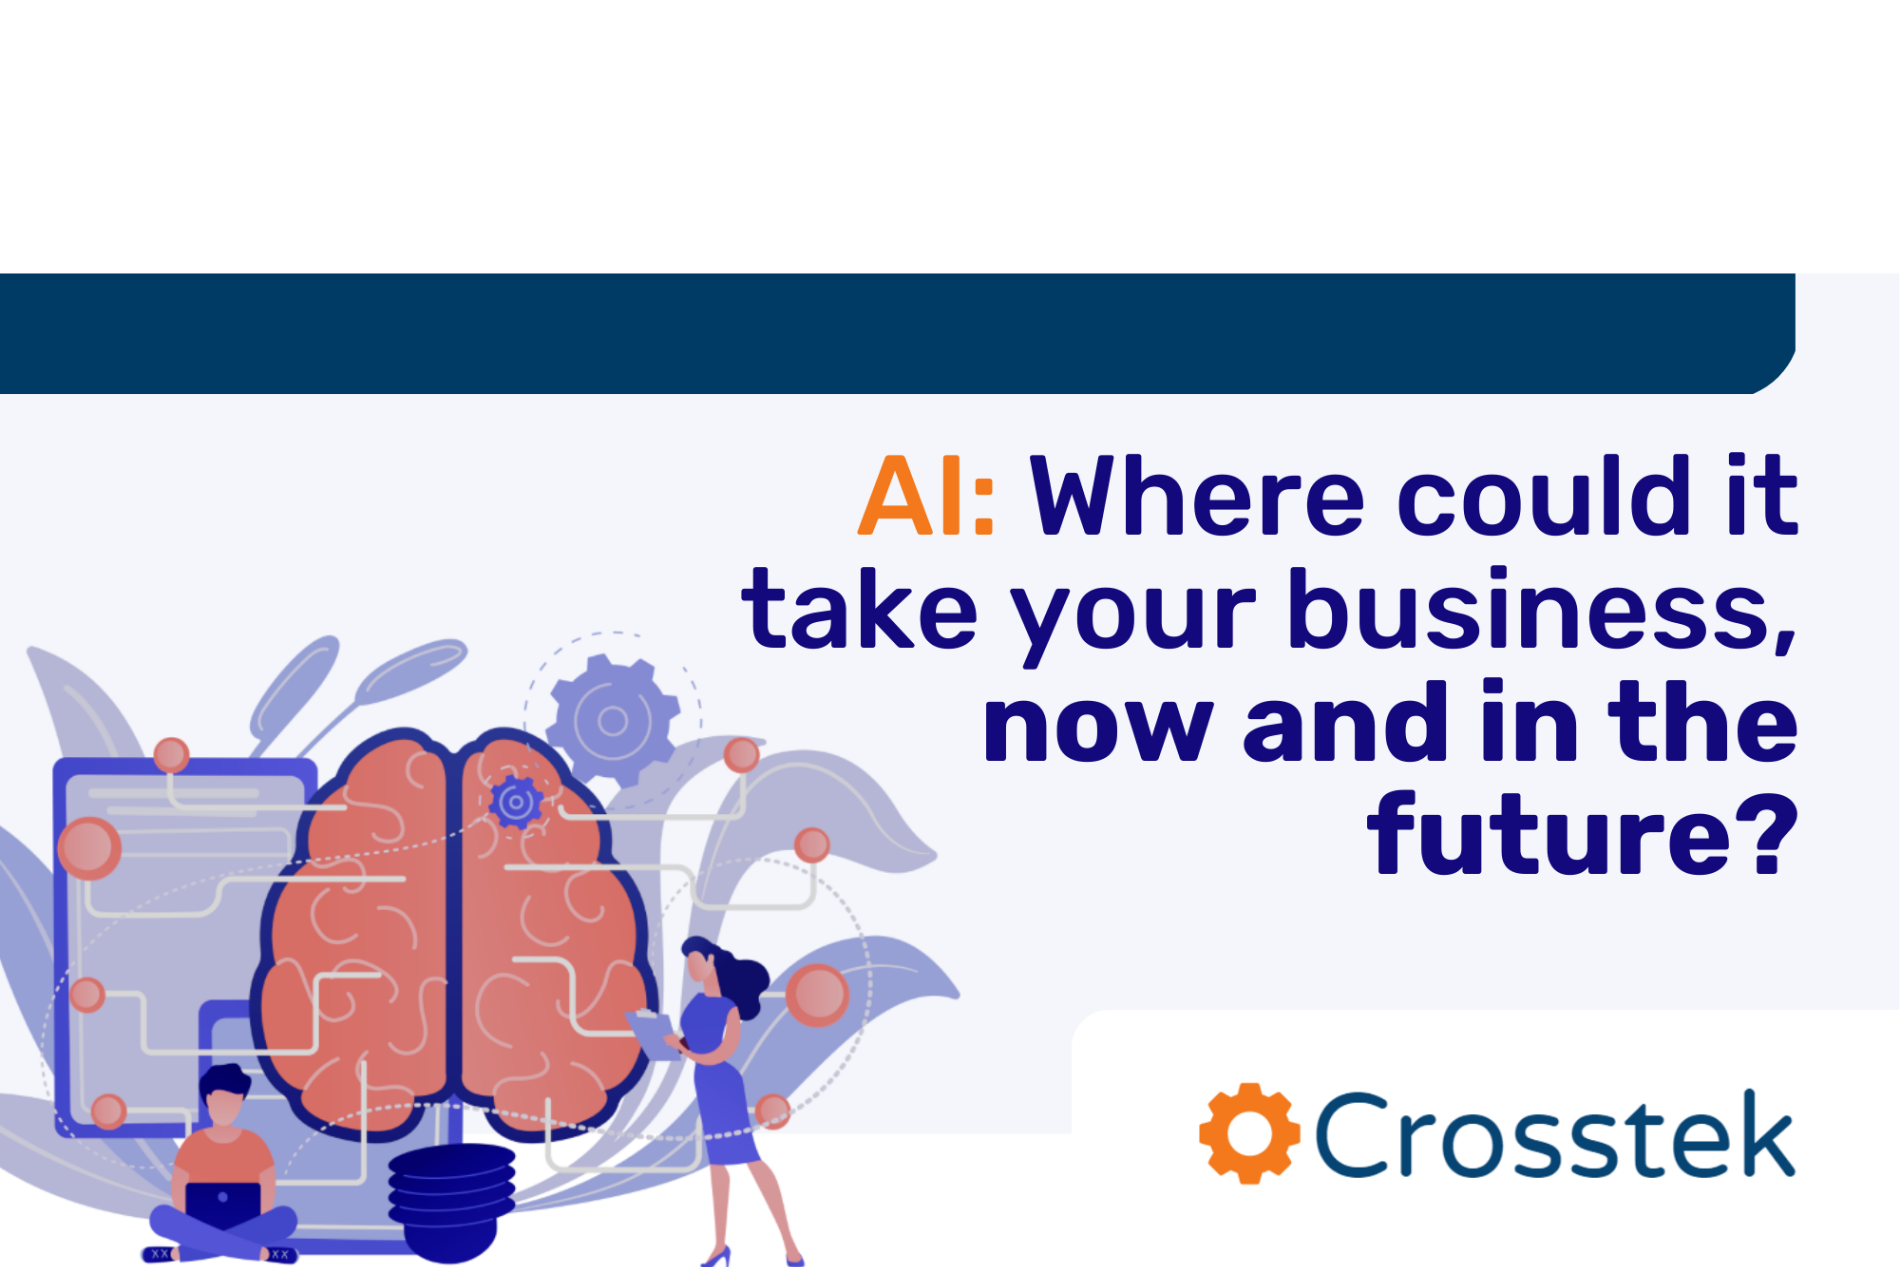 AI: where could it take your business, now and in the future?